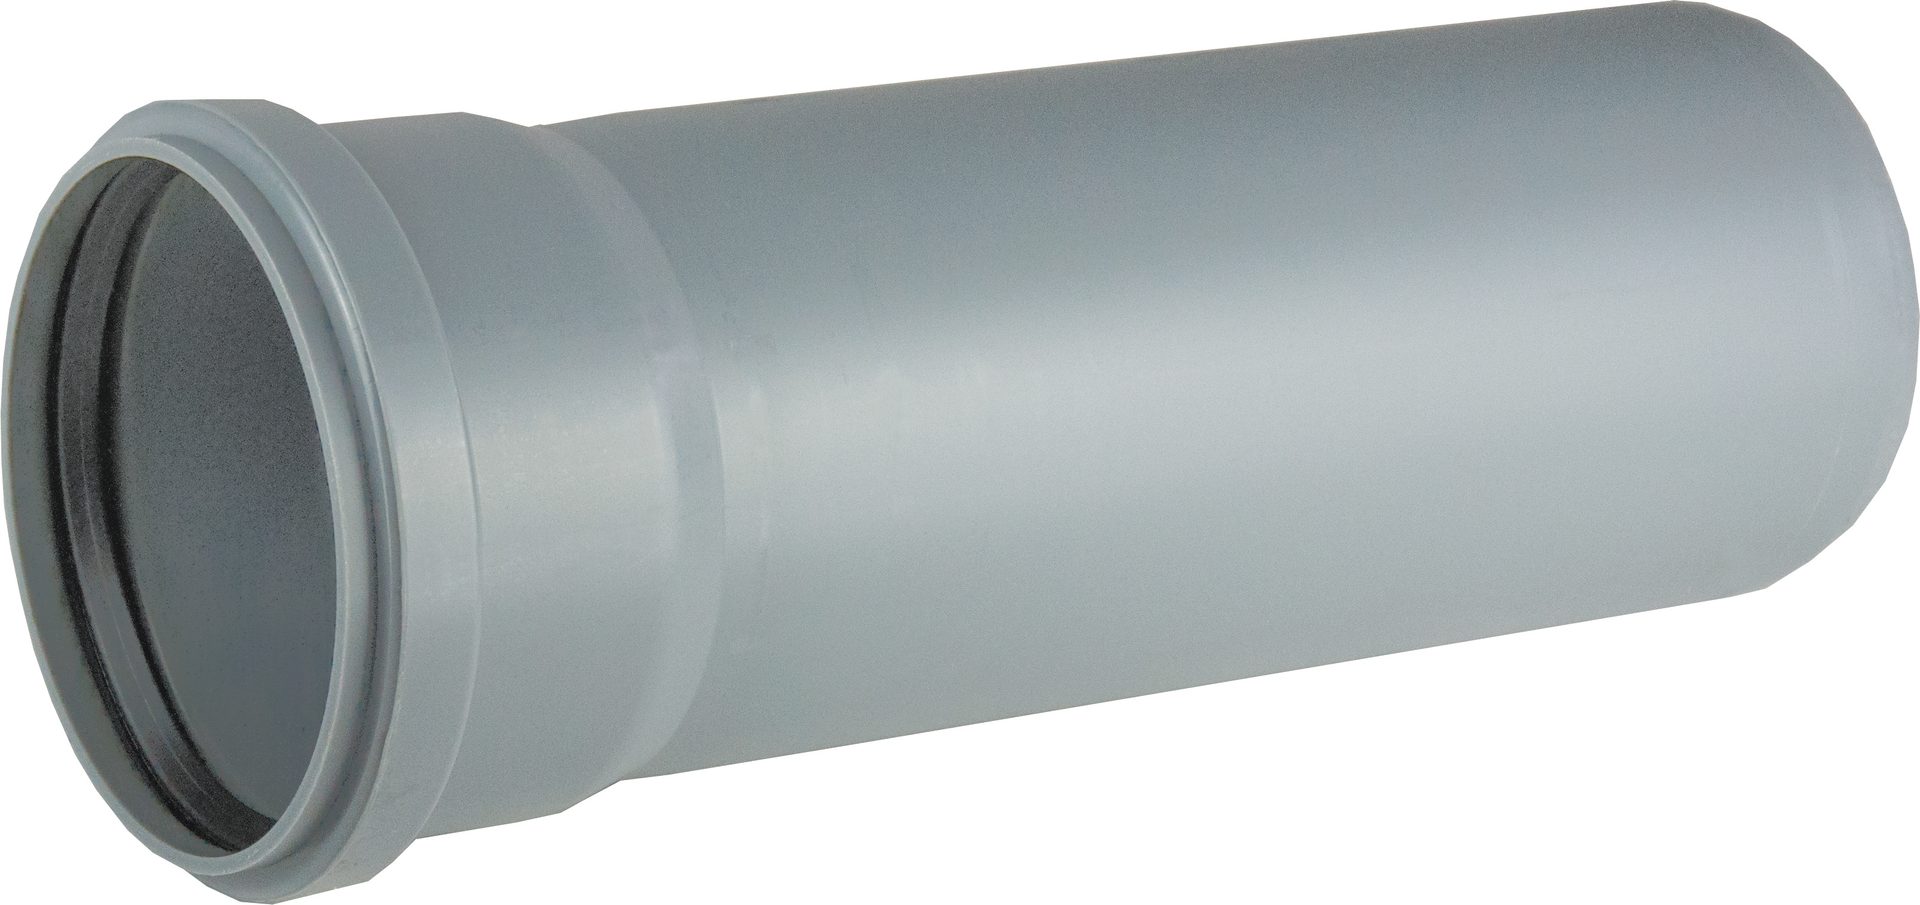 Pipe for Indoor drainage Kaczmarek Fonica PP HT Grey